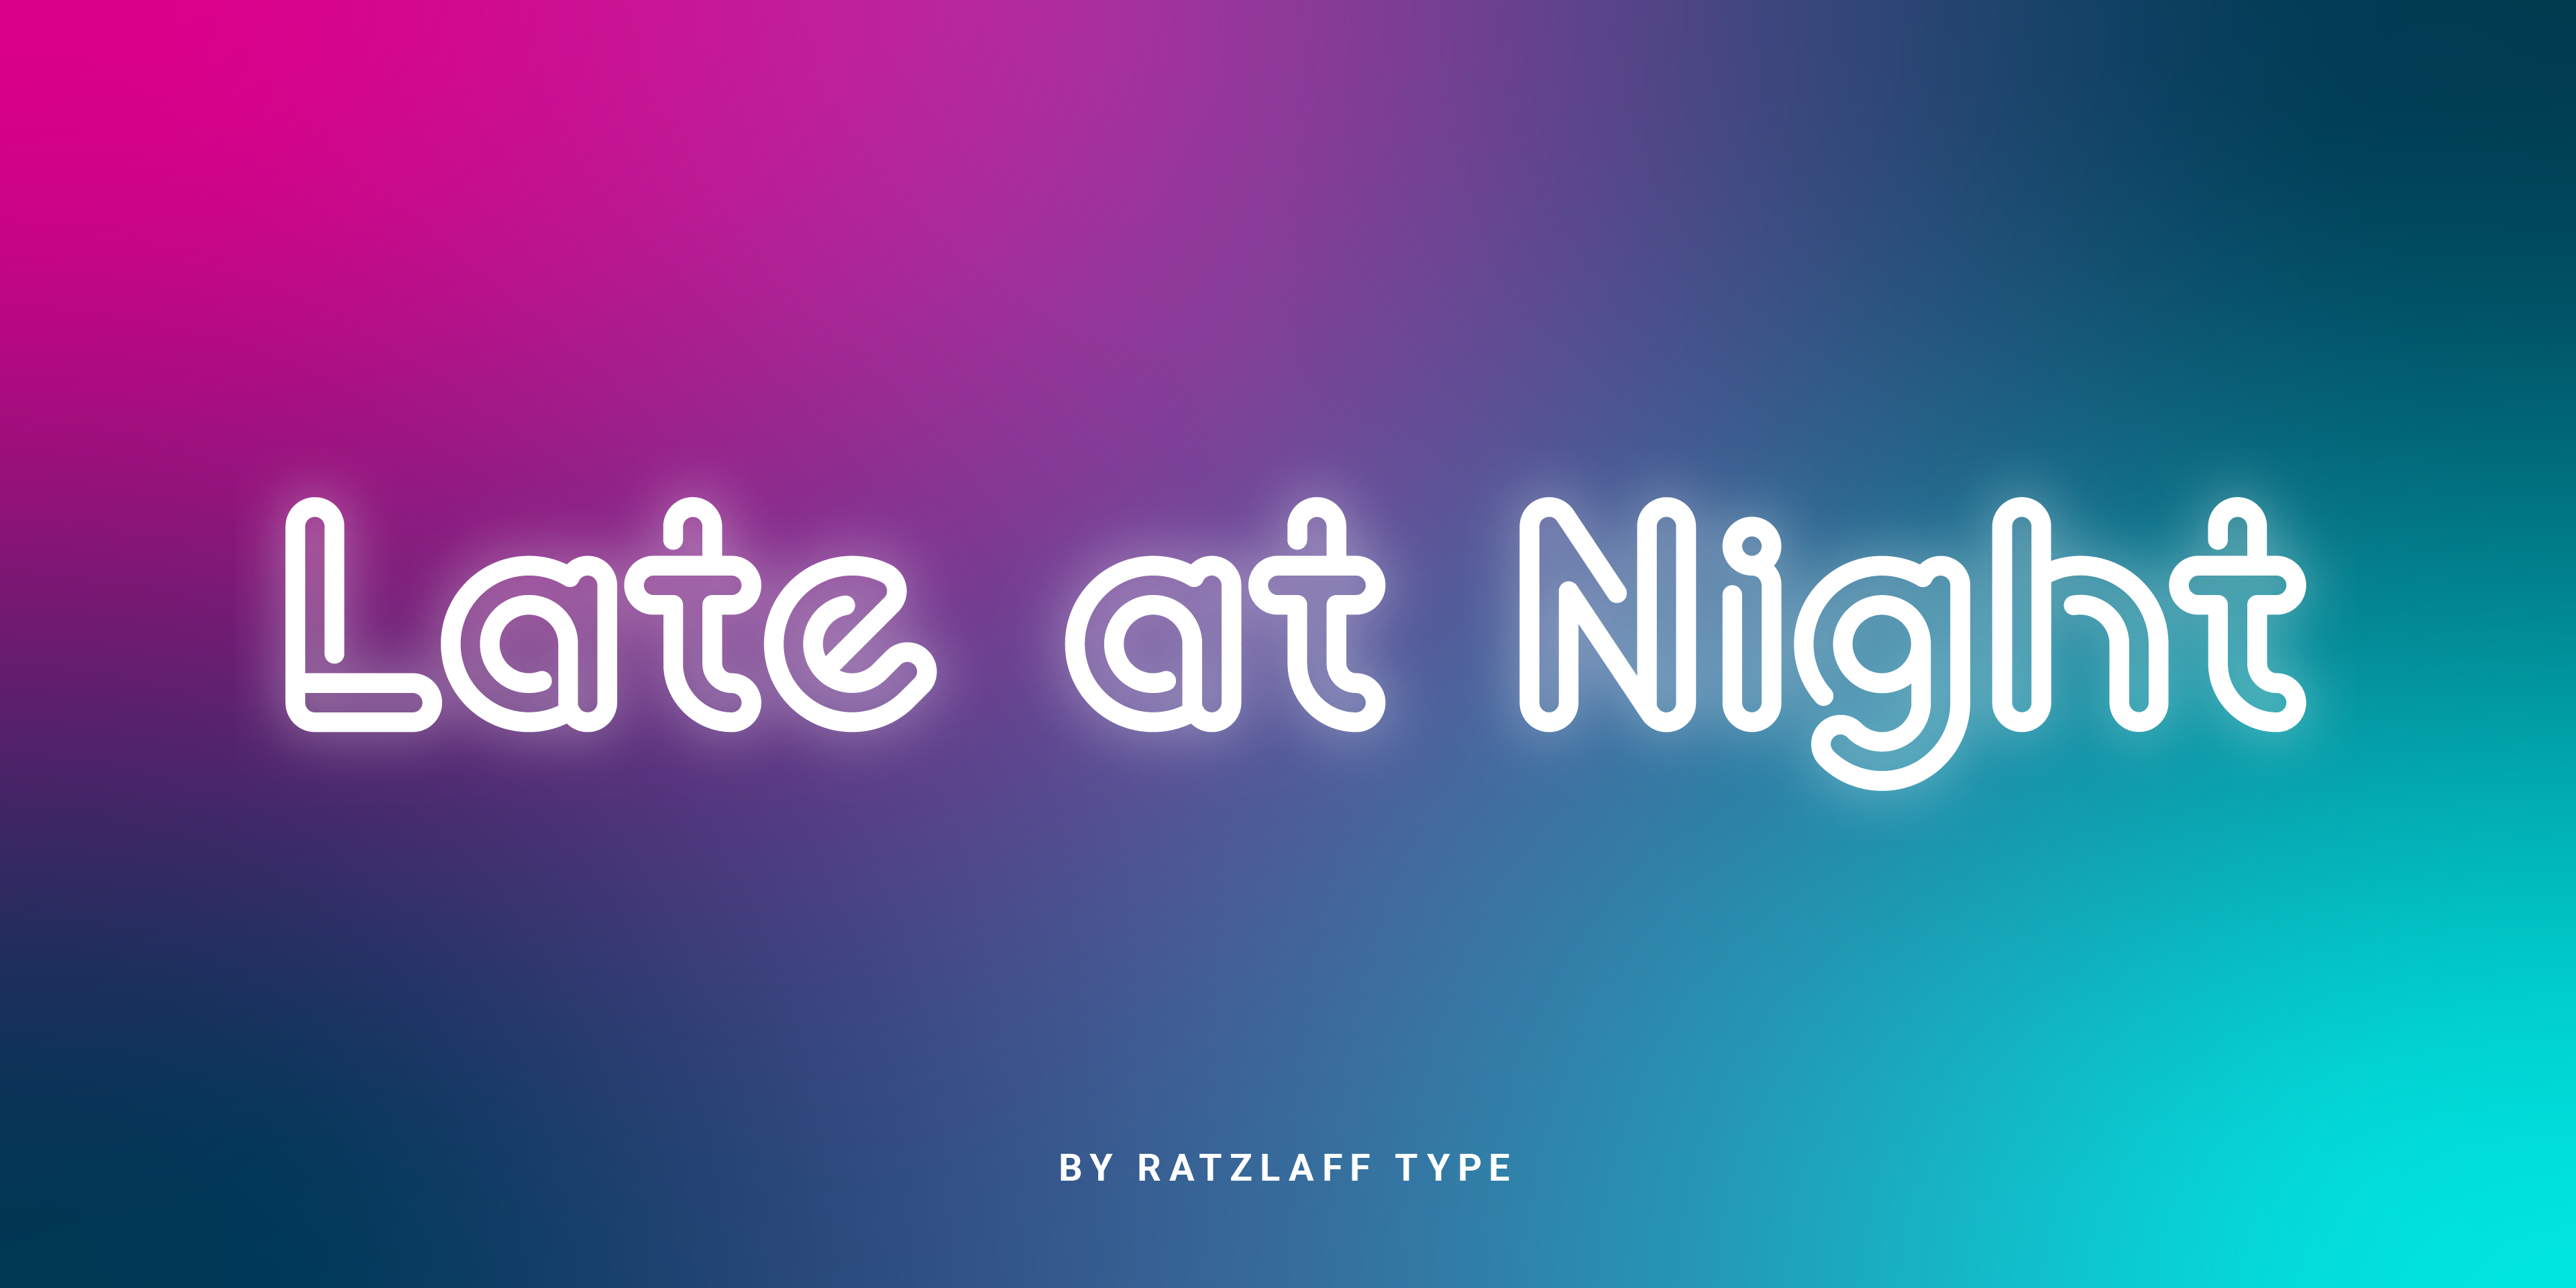 Colorful image with white neon letters saying 'Late at Night'